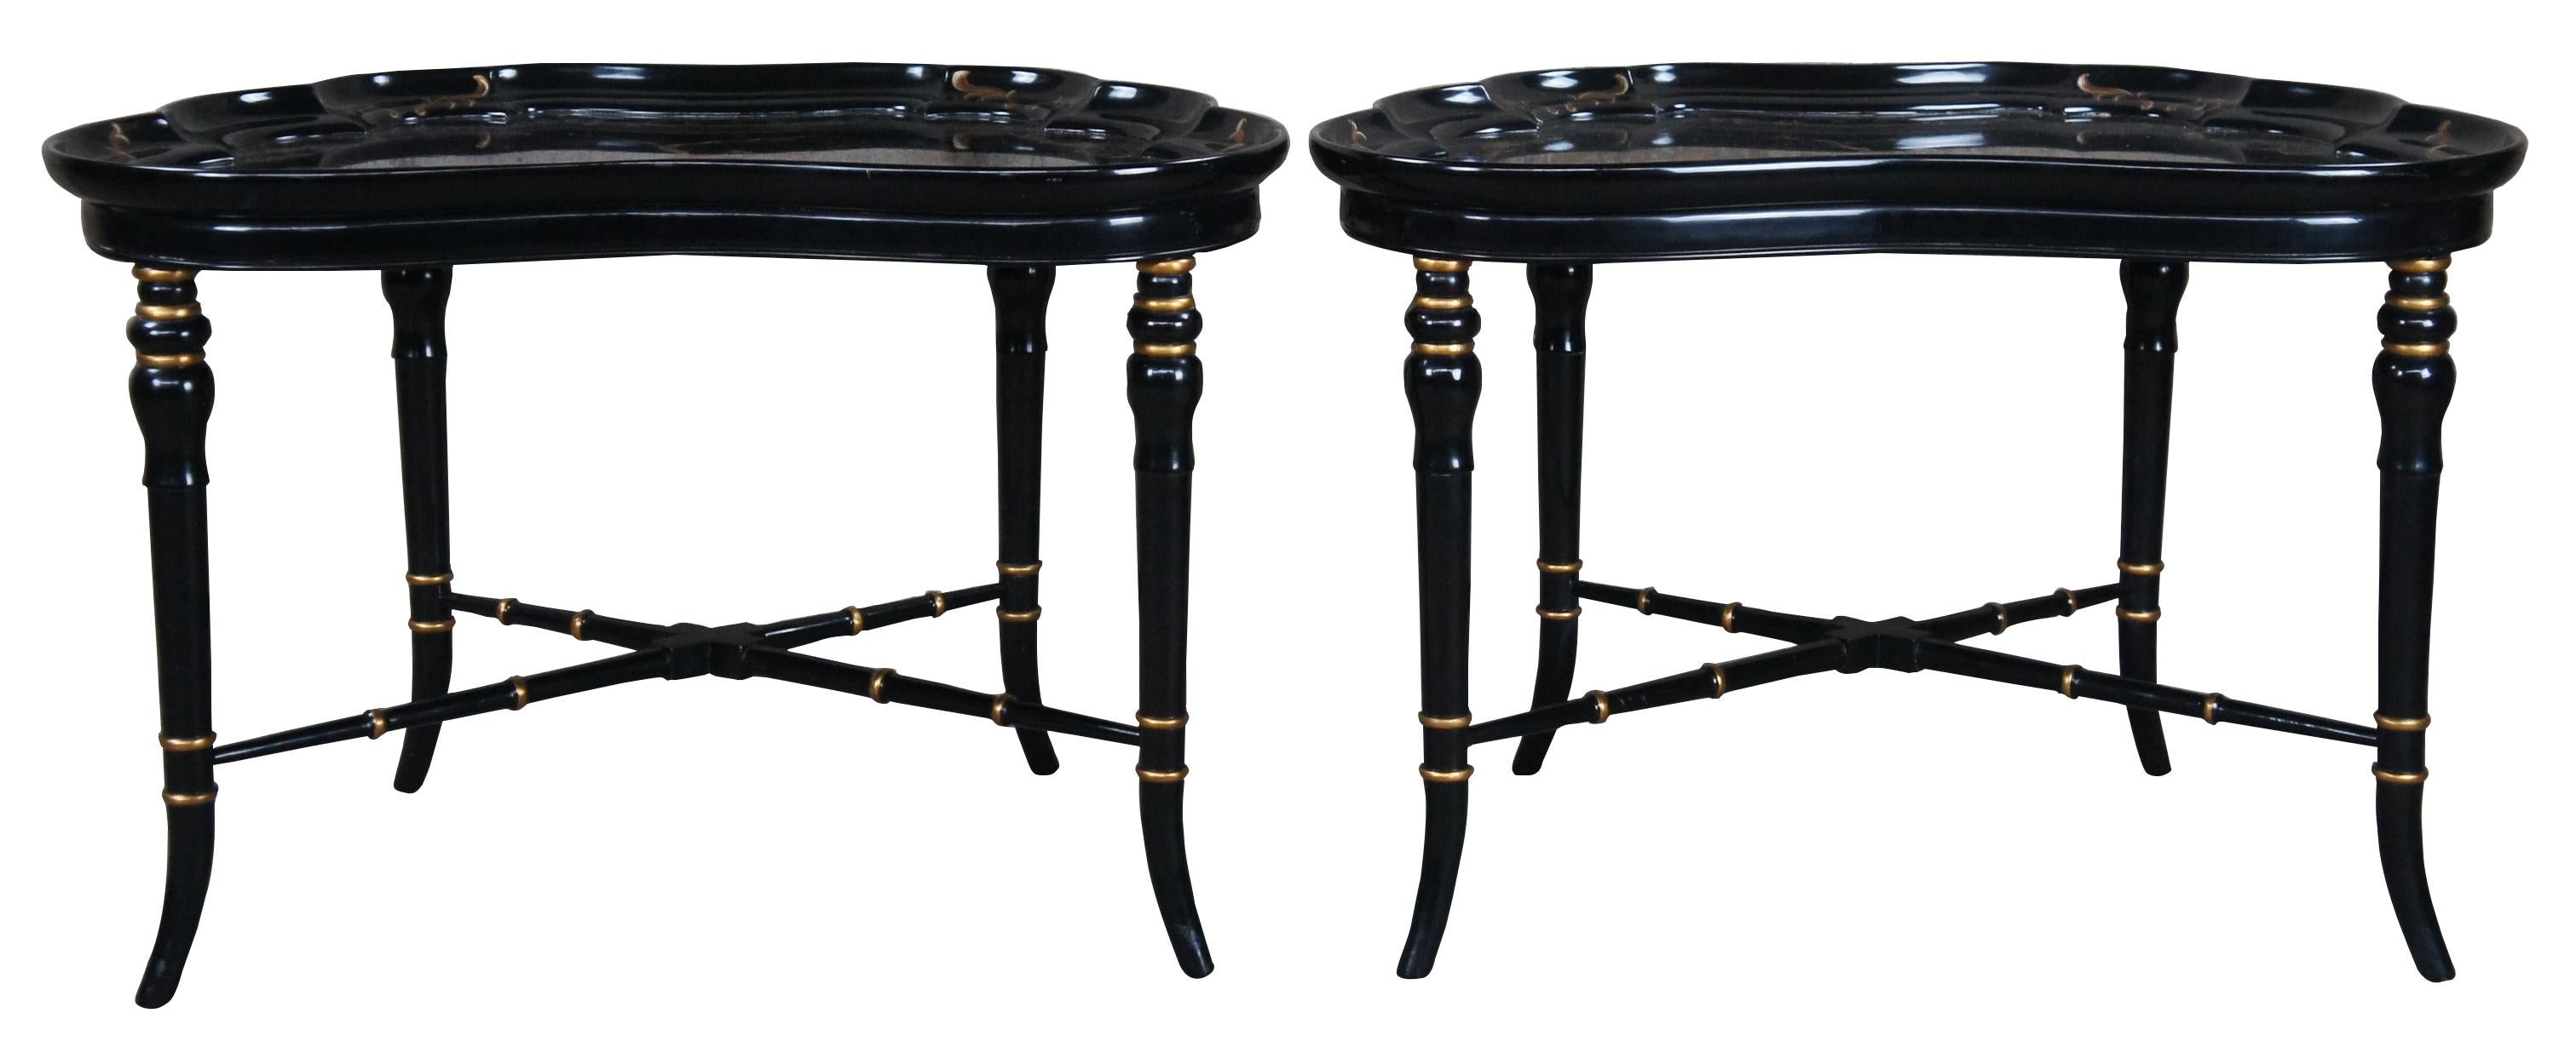 Two vintage English Regency style tray tables by Karges Furniture.  Featuring black lacquered finish with a butterfly shaped top with gallery that surrounds a scene of two gamecocks and a old Bonsai tree.  Supported by faux bamboo legs with gold